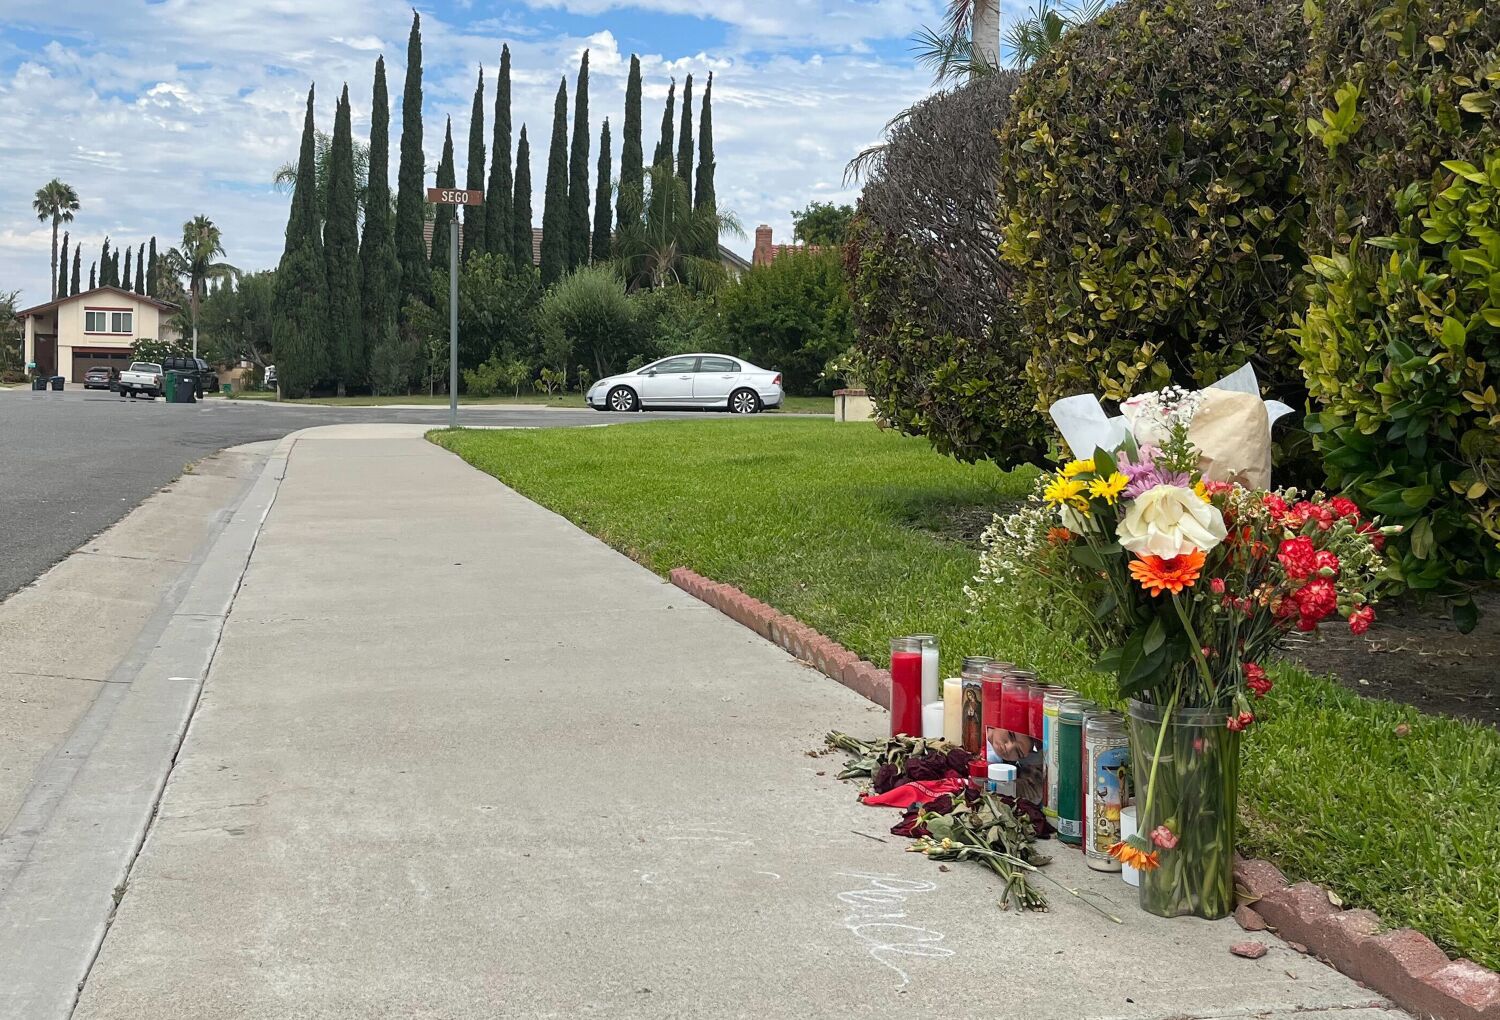 'Why here?' Deadly Irvine ambush rattles community that rarely sees violence